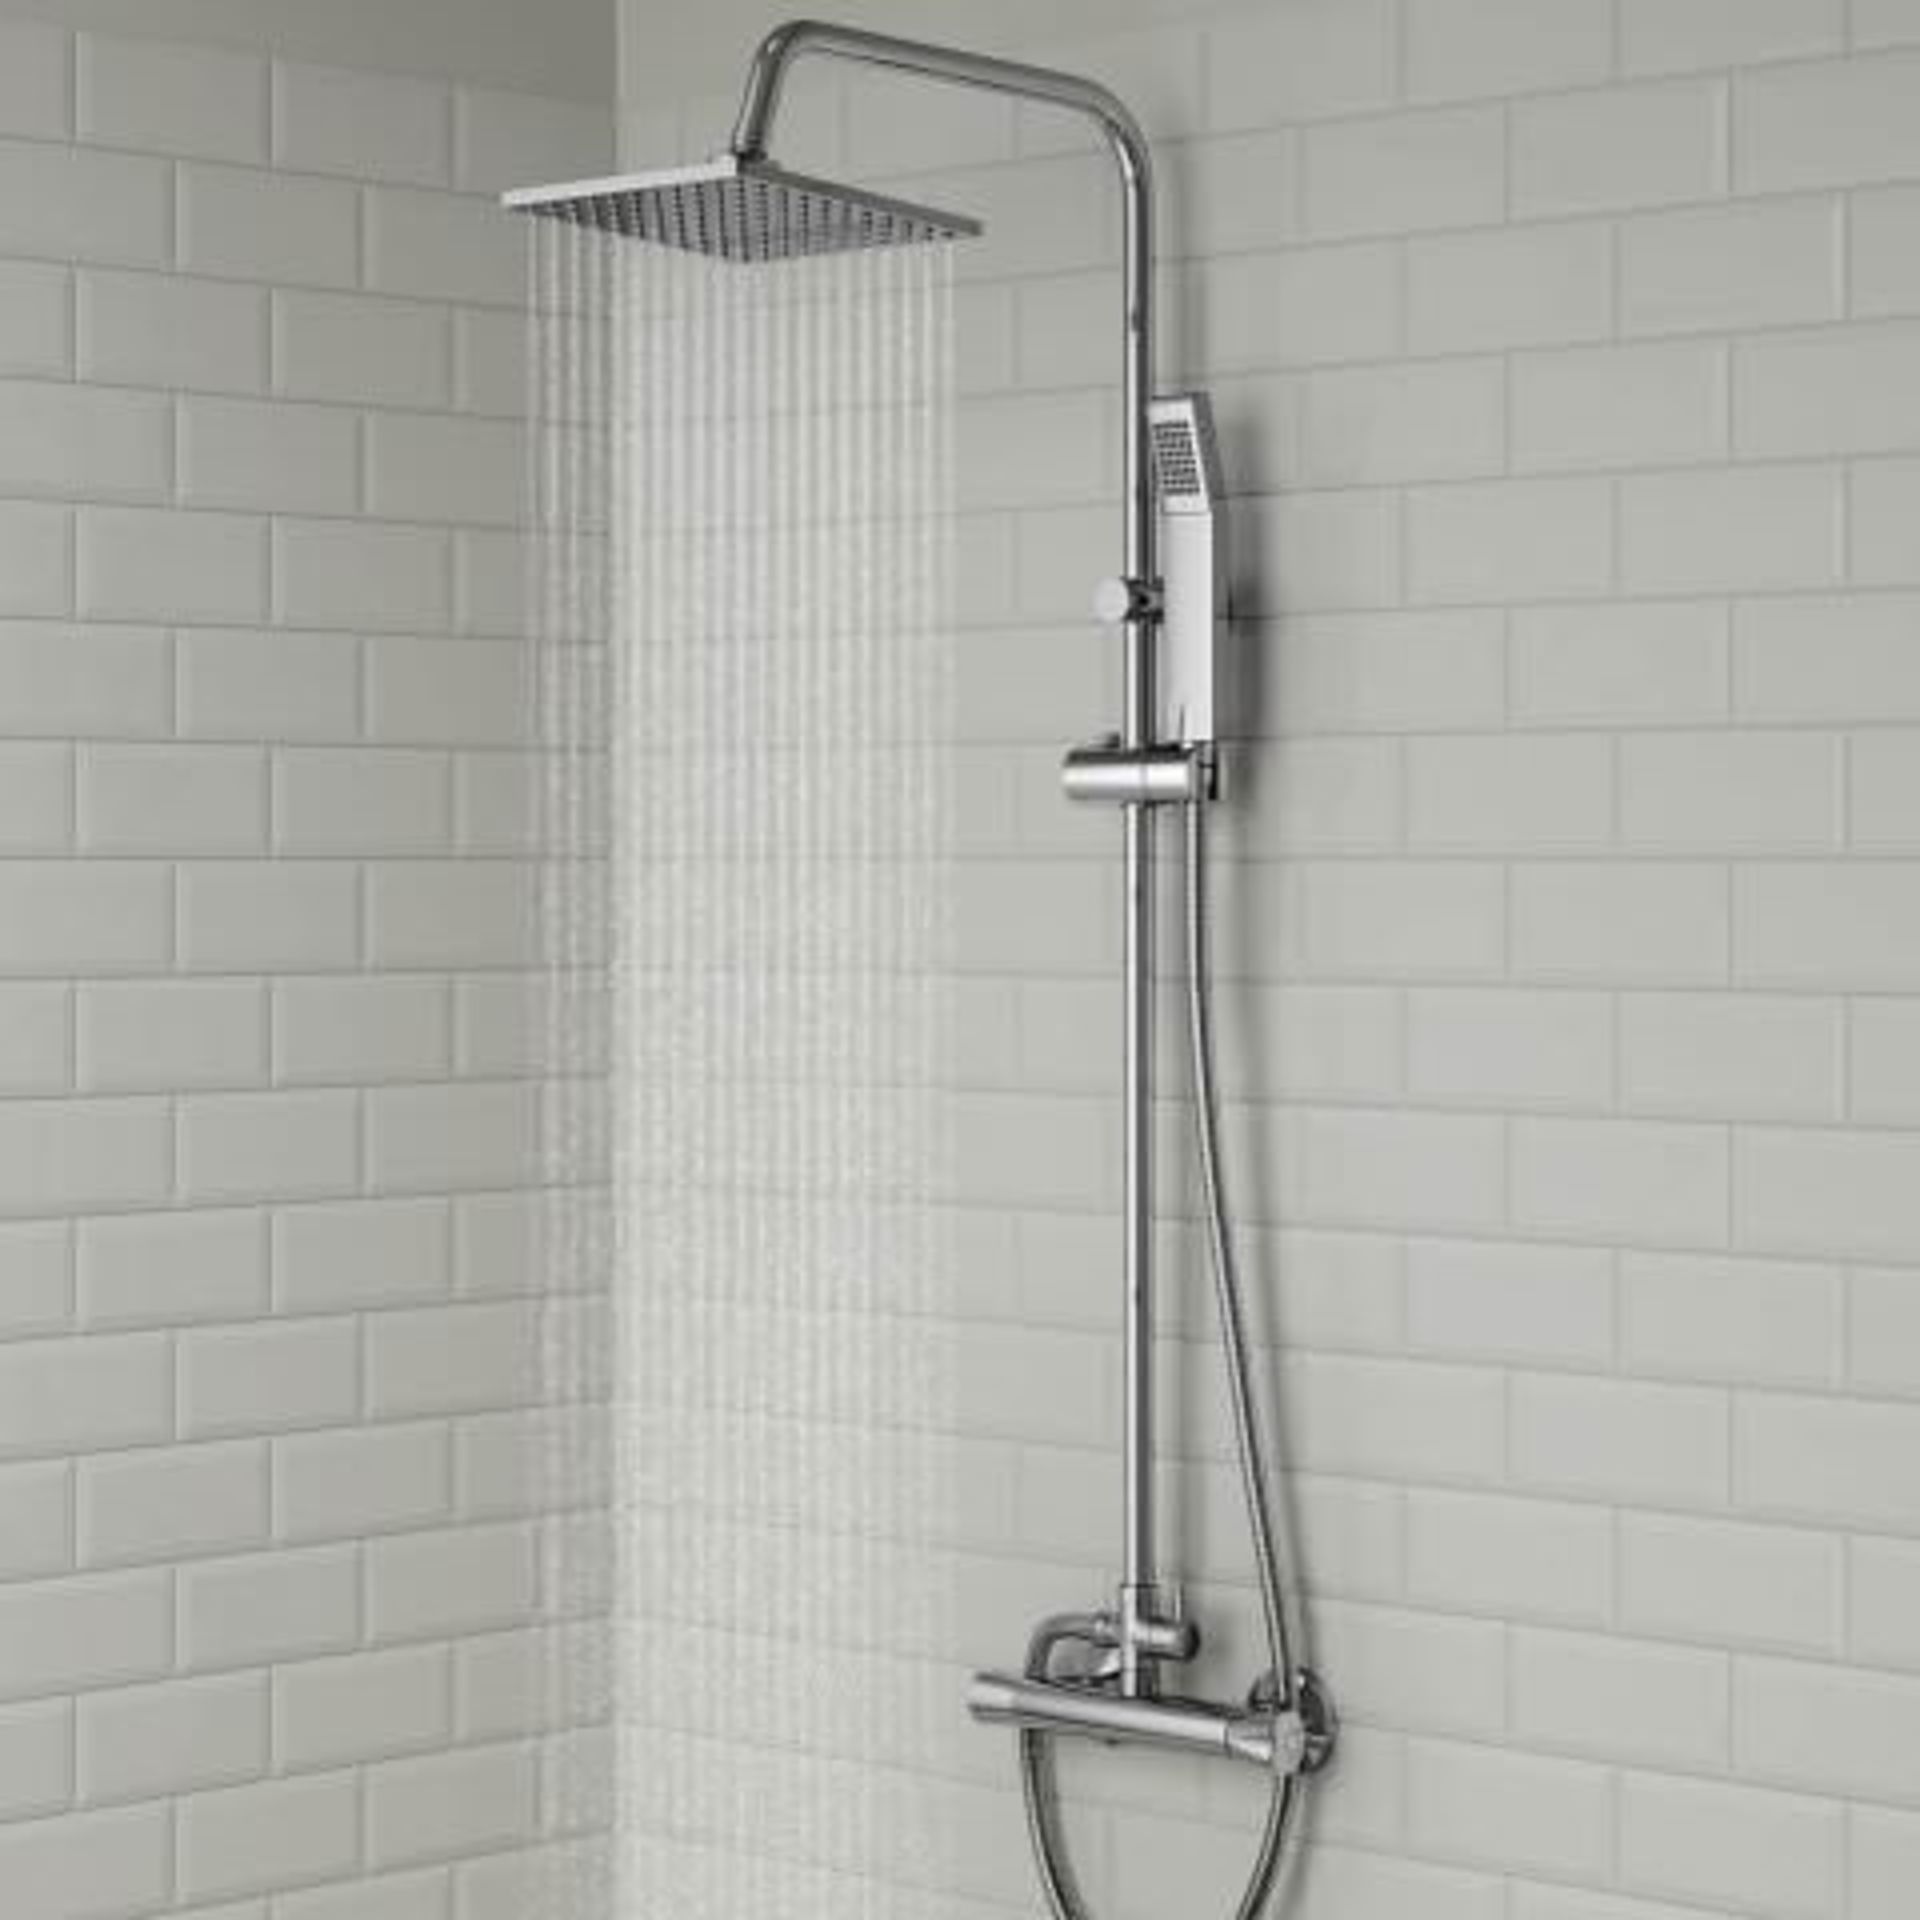 (P41) 200mm Square Head Thermostatic Exposed Shower Kit & Hand Held. RRP £249.99. Simplistic Style